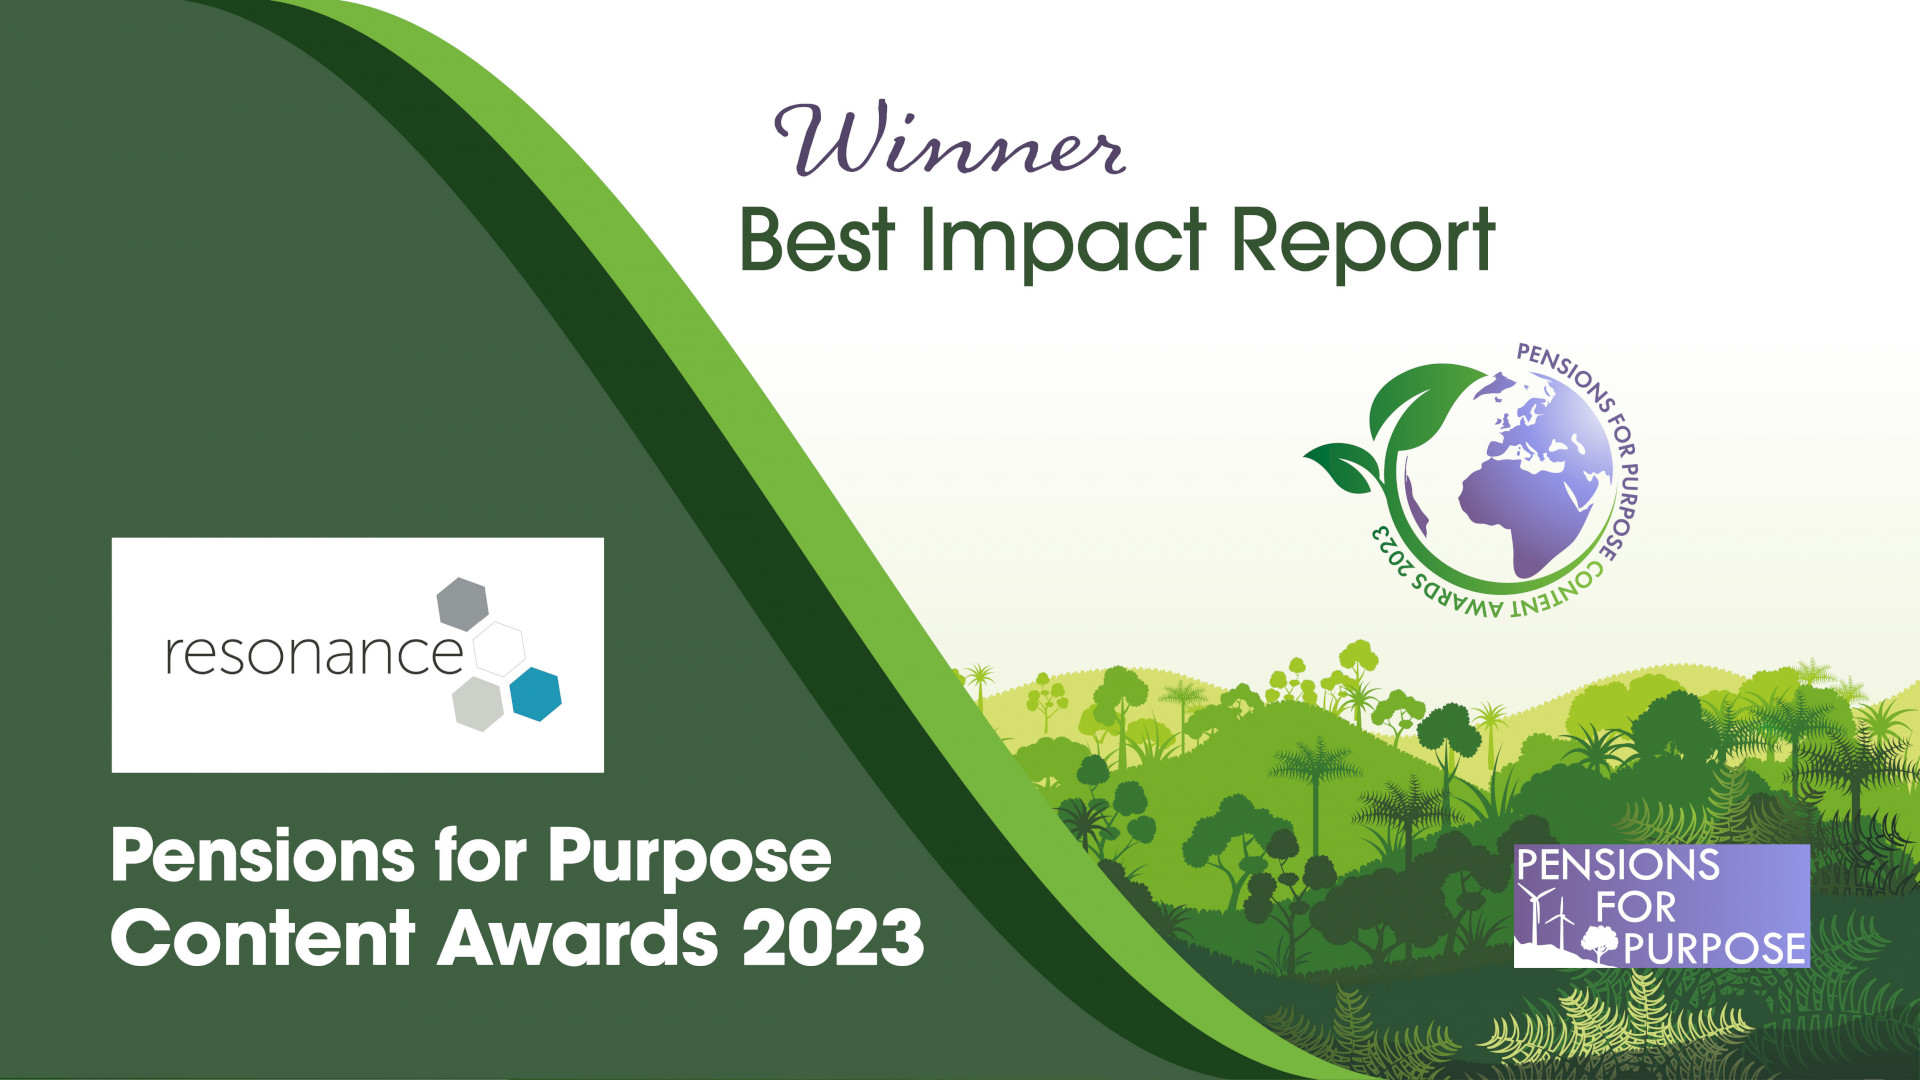 Pensions for Purpose Content Awards 2023